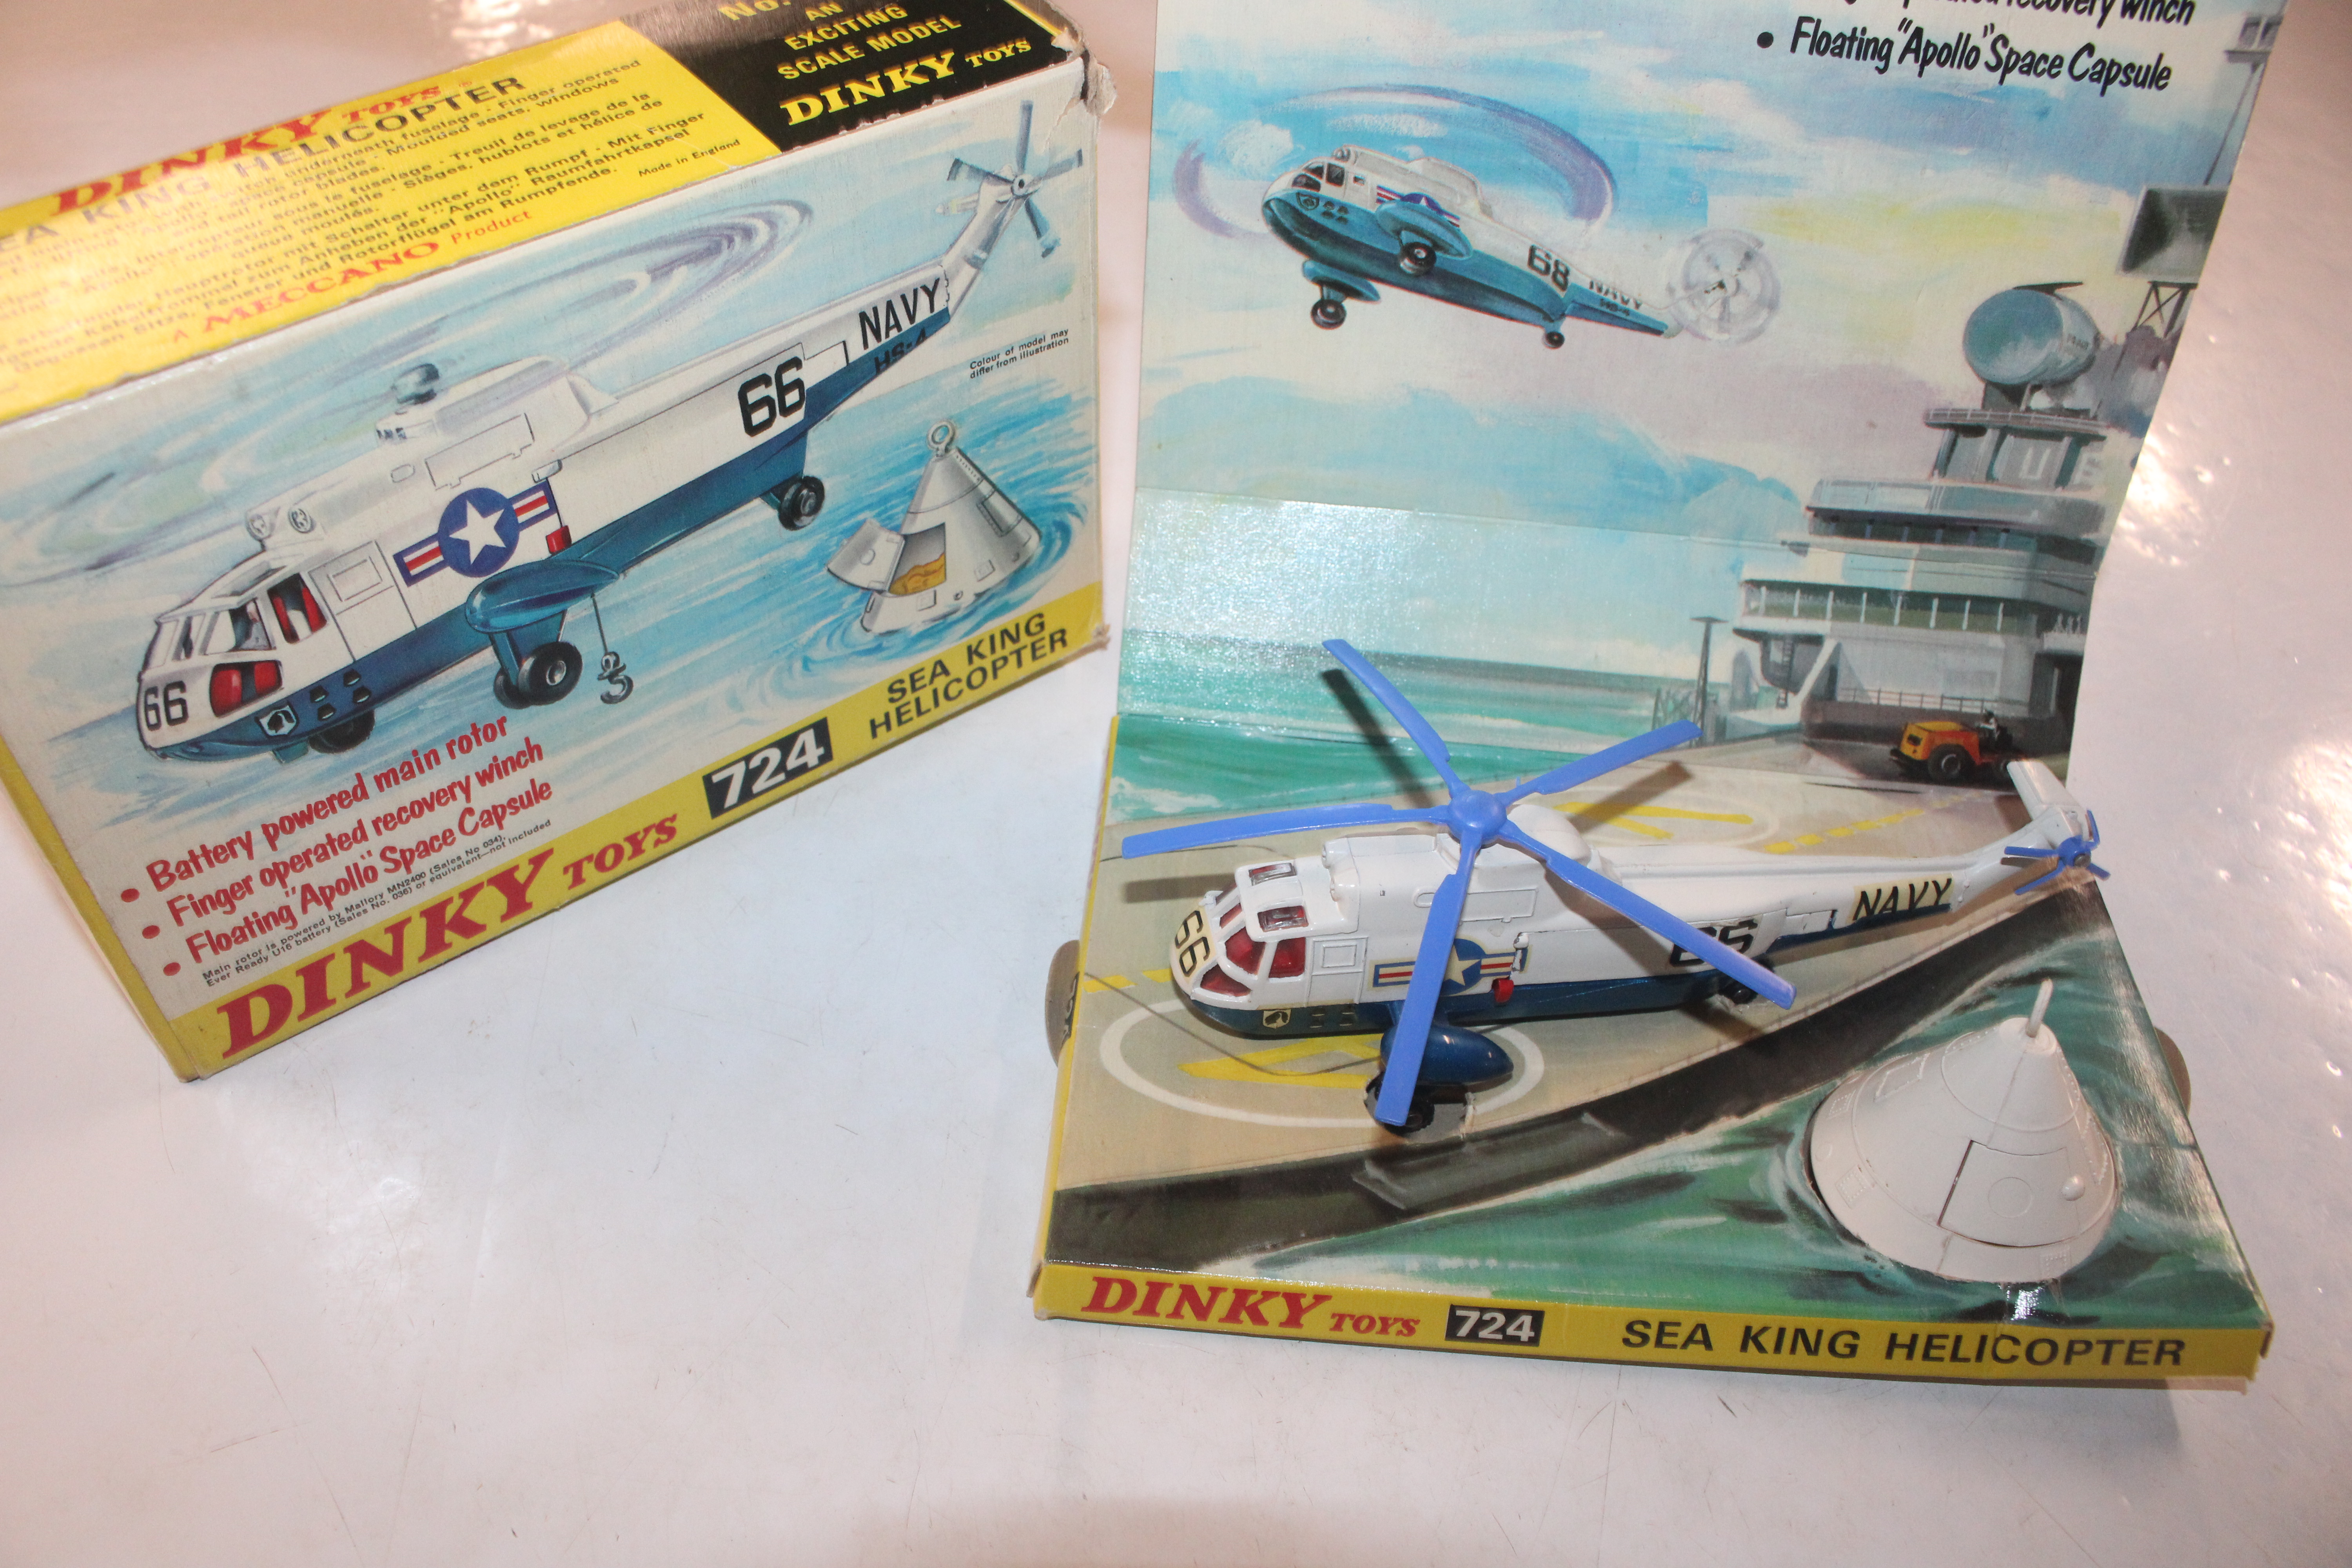 A Dinky toy 724 Sea King helicopter and box